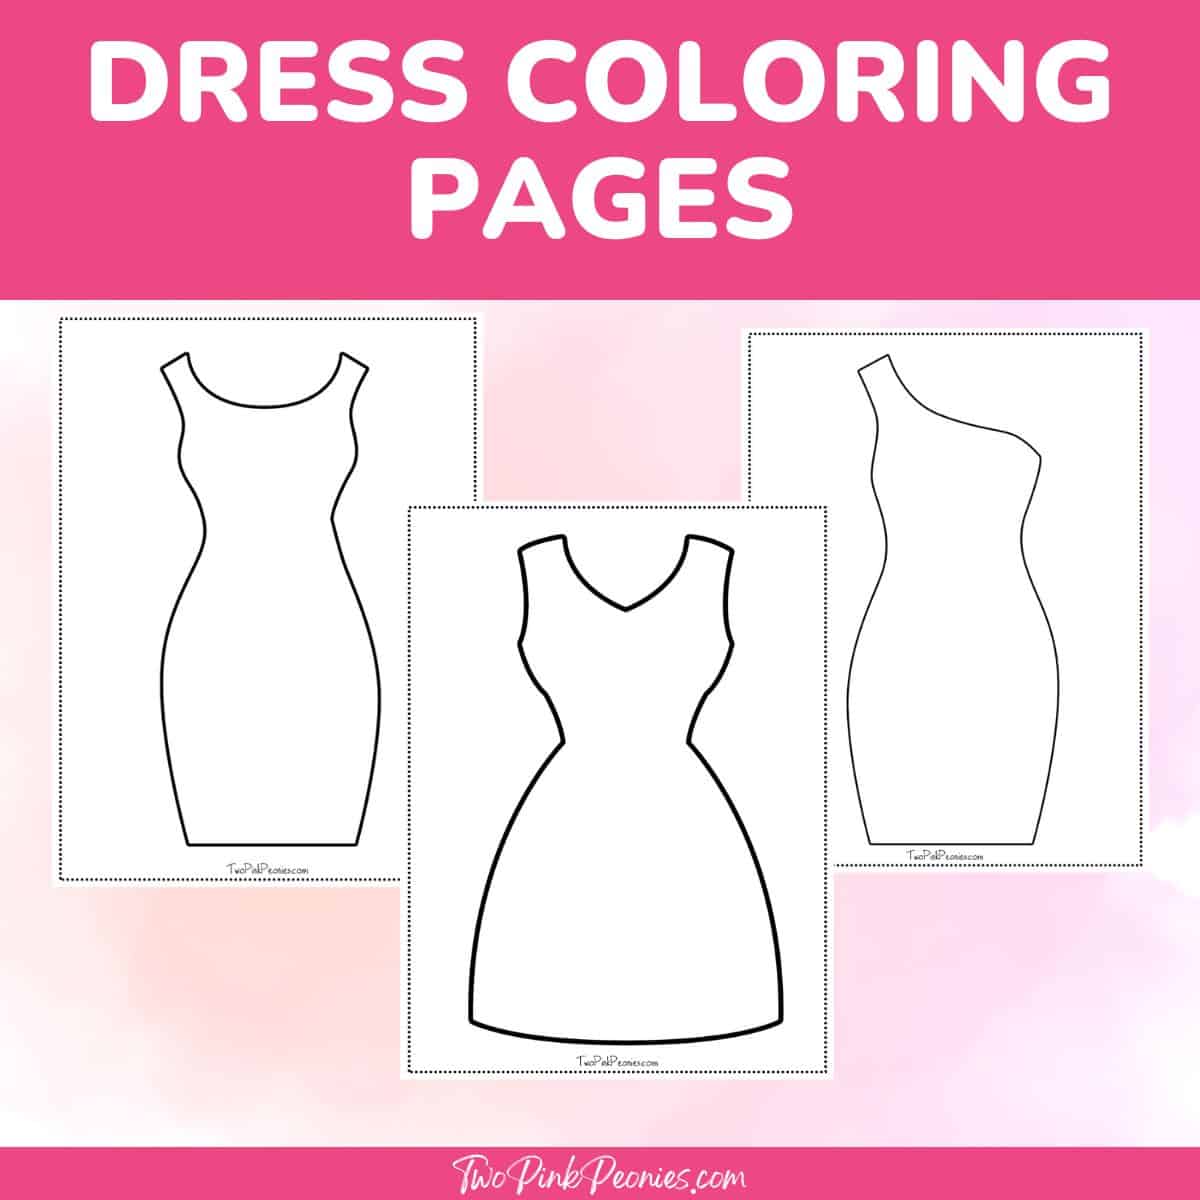 text that says dress coloring pages below are mock ups of the dressees